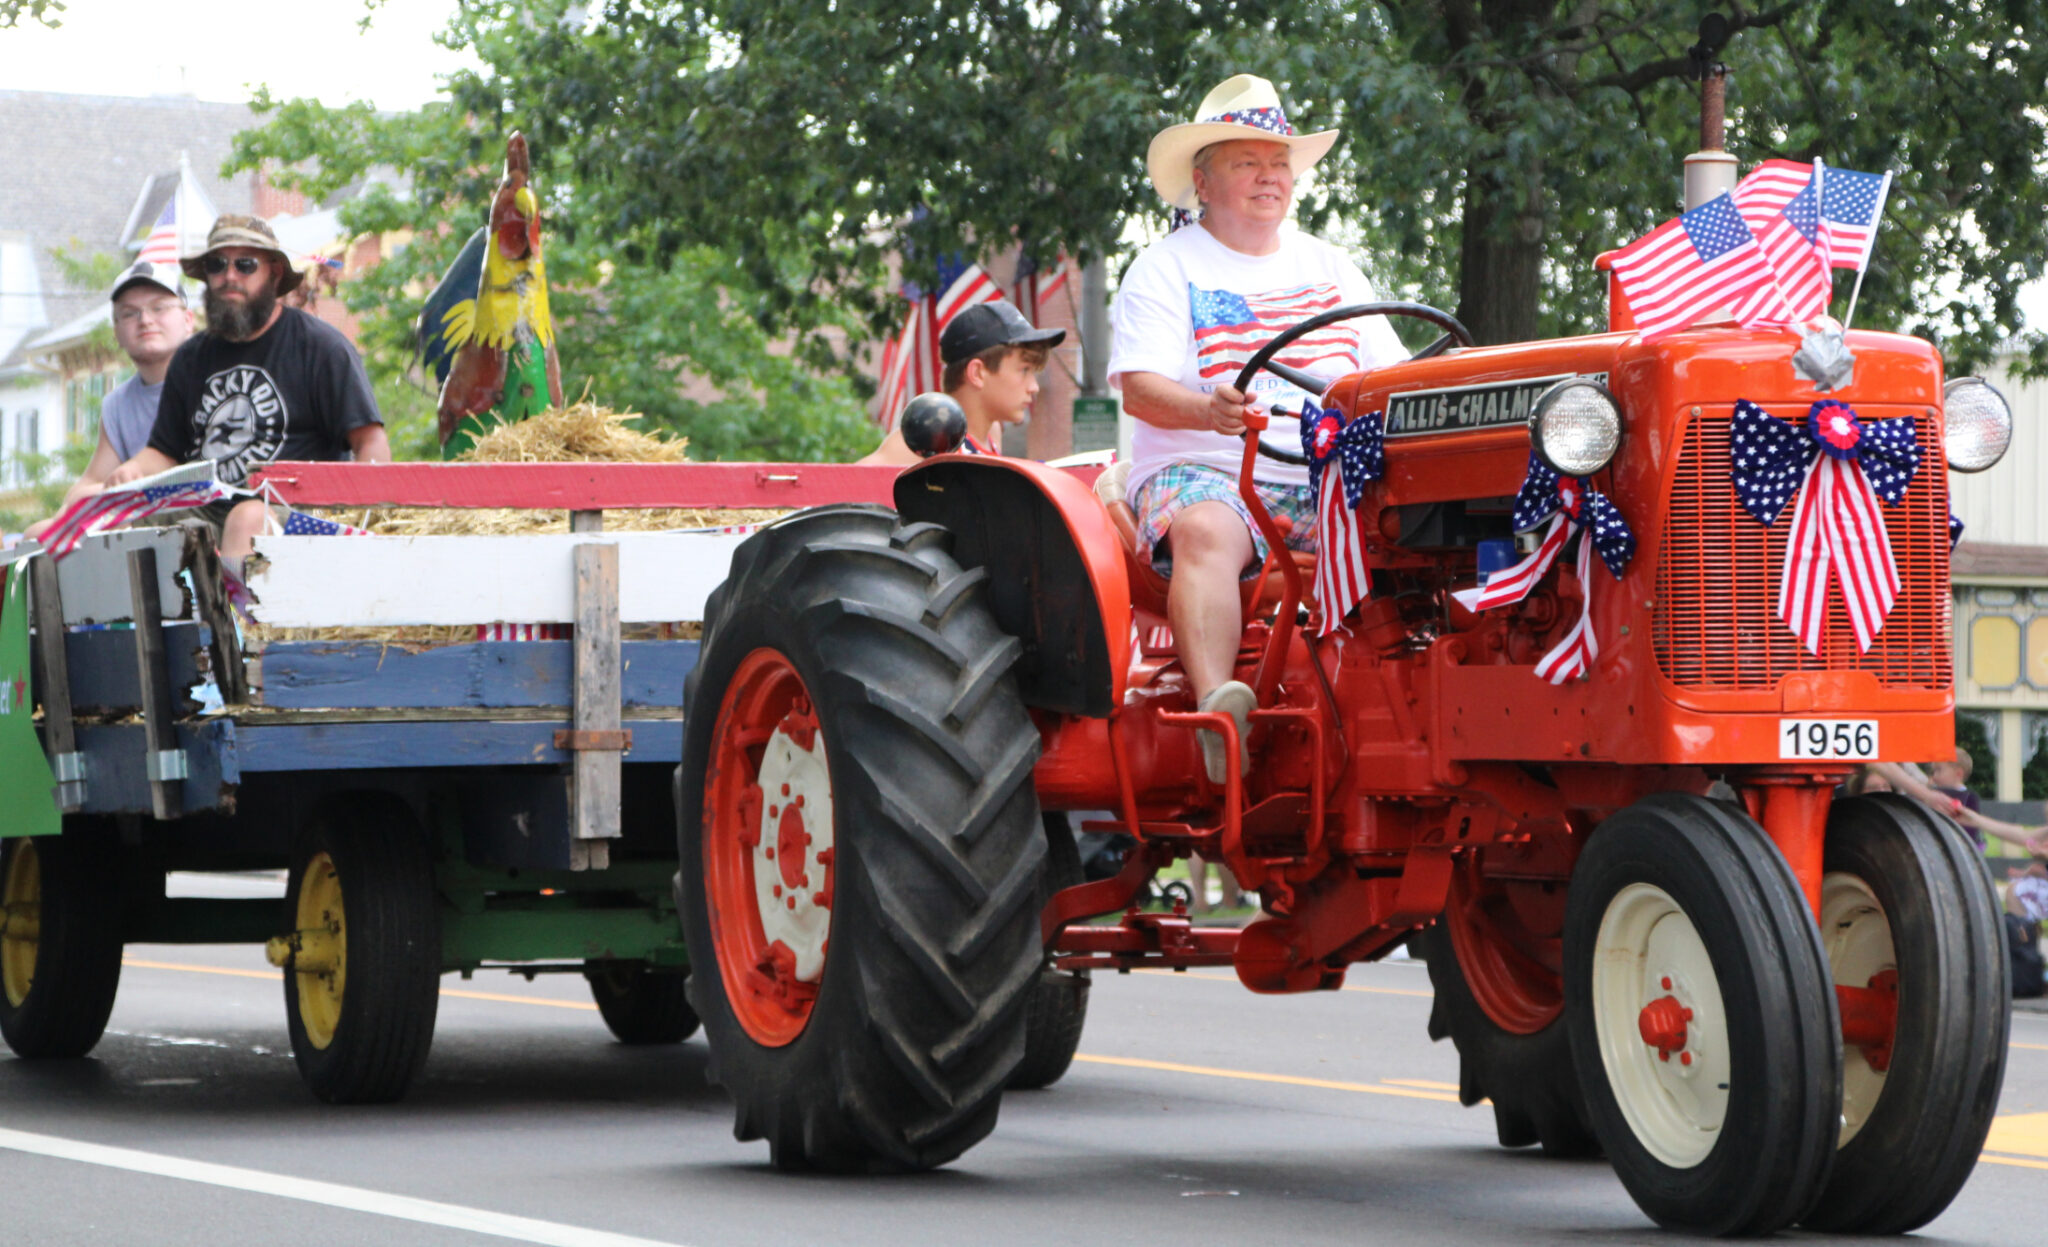 25 Photos, 3 Videos from Pottstown’s Big July 4 Parade